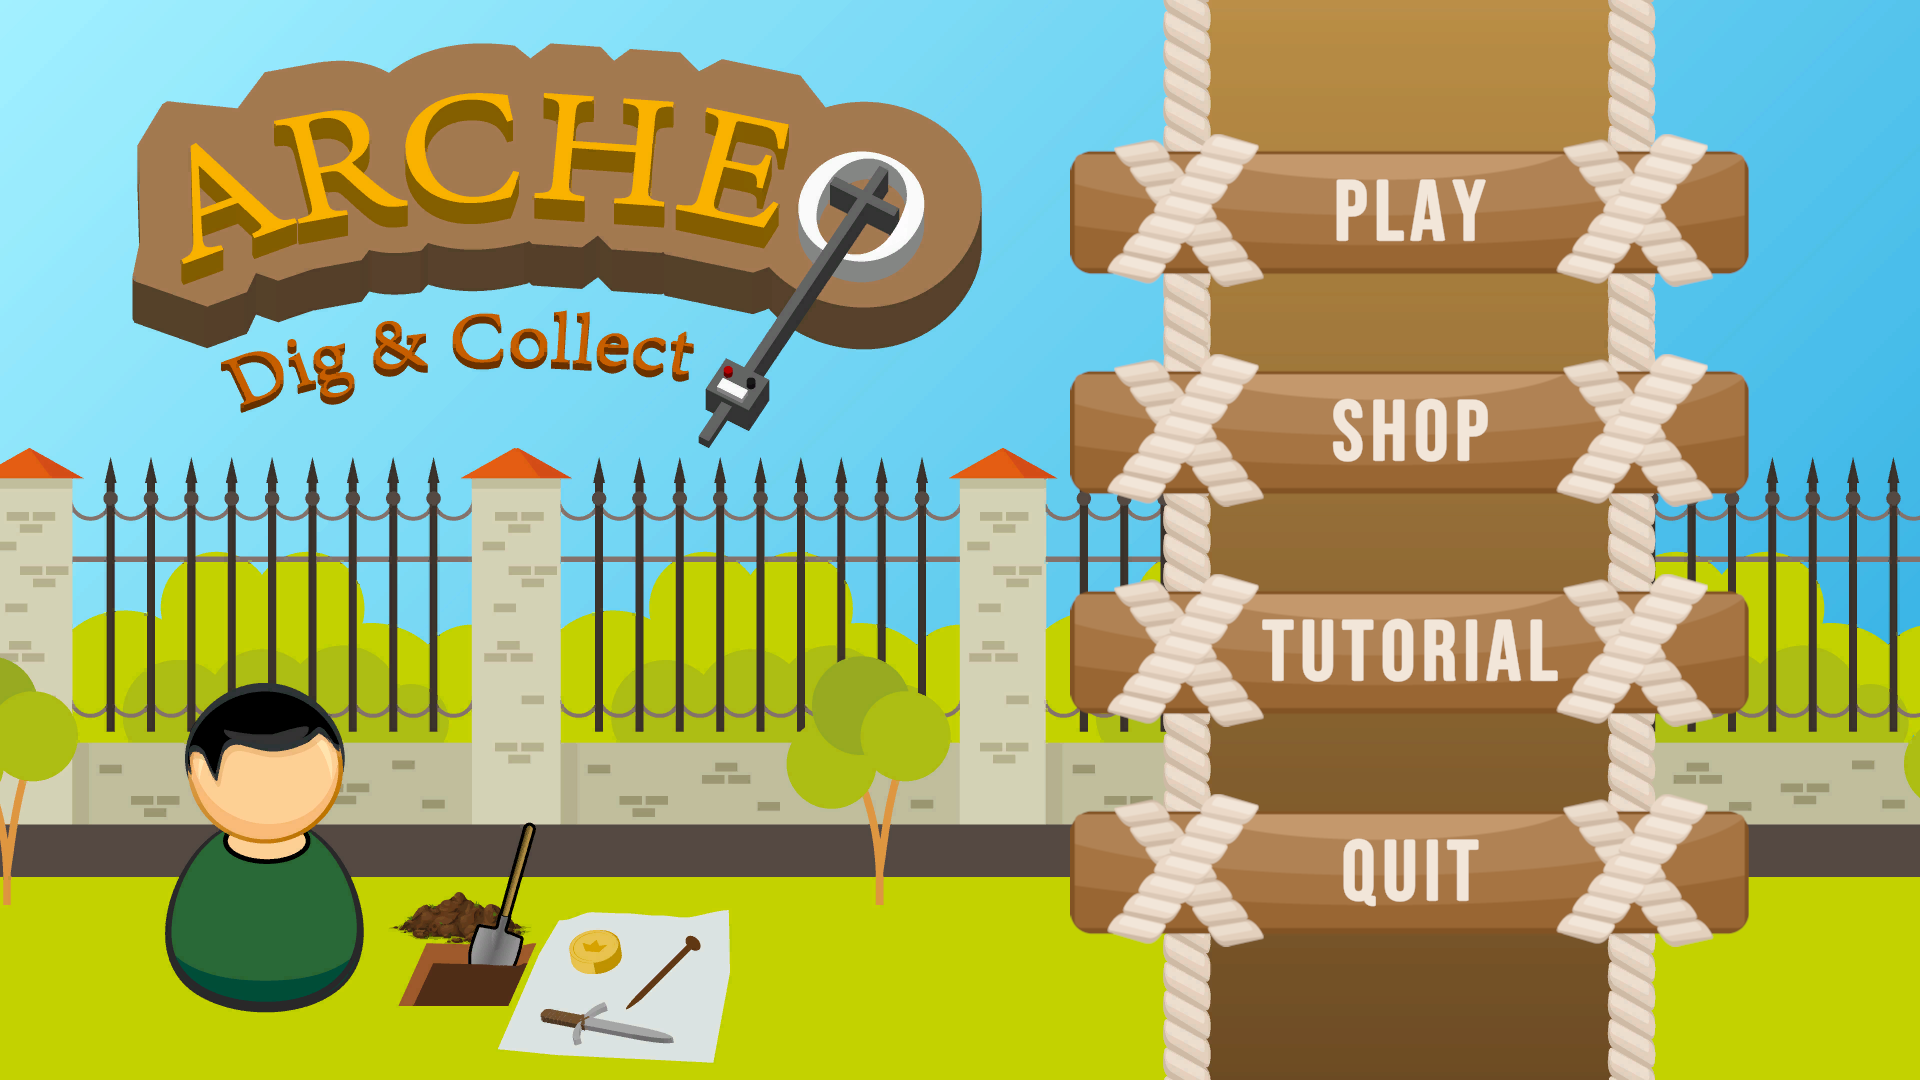 Games - Archeo, dig & collect (metal detecting game) - Unity Forum